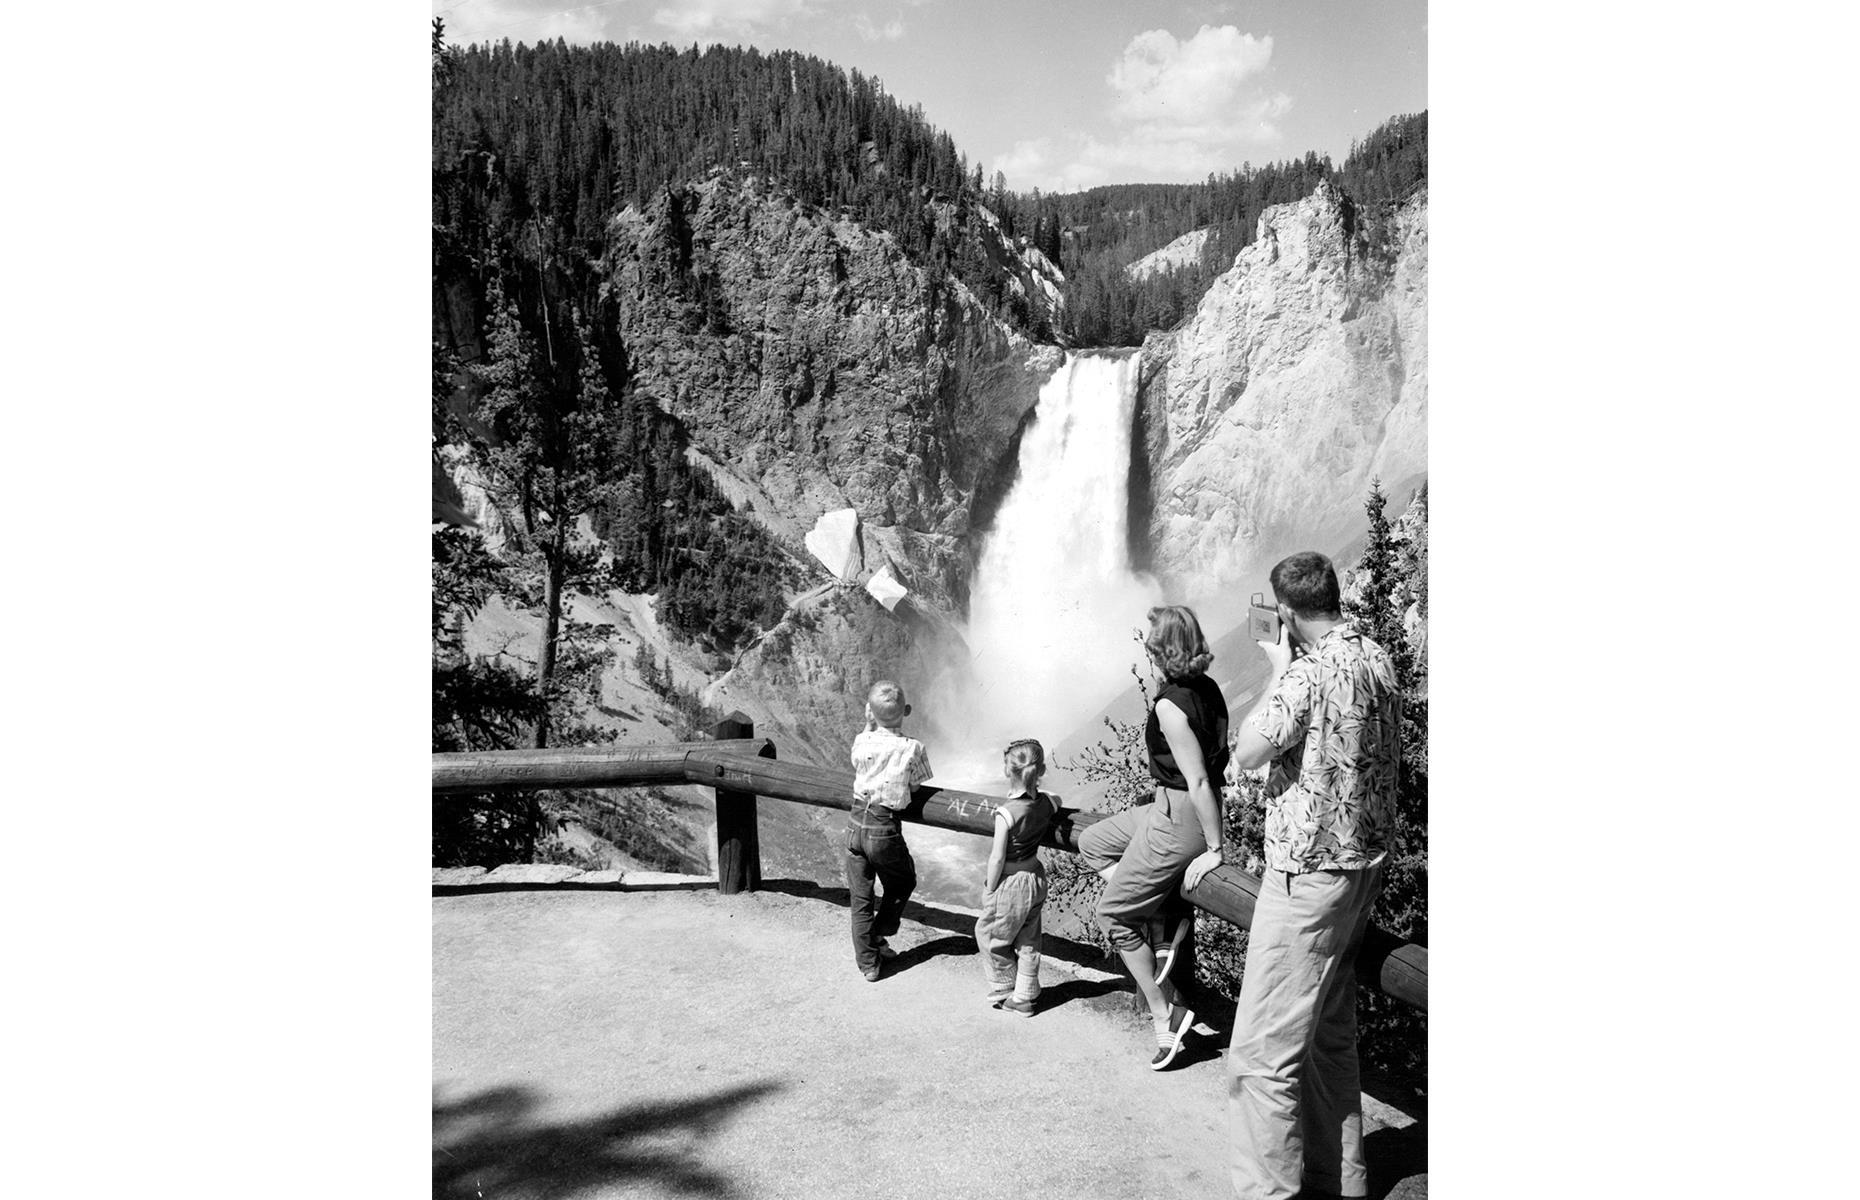 <p>Staying within Wyoming, Yellowstone, America's oldest national park, has also welcomed campers and vacationers for more than a century. Captured in 1955, this young family looks out onto Tower Falls, a dramatic cascade that drops down for 132 feet (40m). <a href="https://www.loveexploring.com/galleries/76836/these-are-the-worlds-most-beautiful-waterfalls?page=1">Here are more of the world's most beautiful waterfalls</a>.</p>